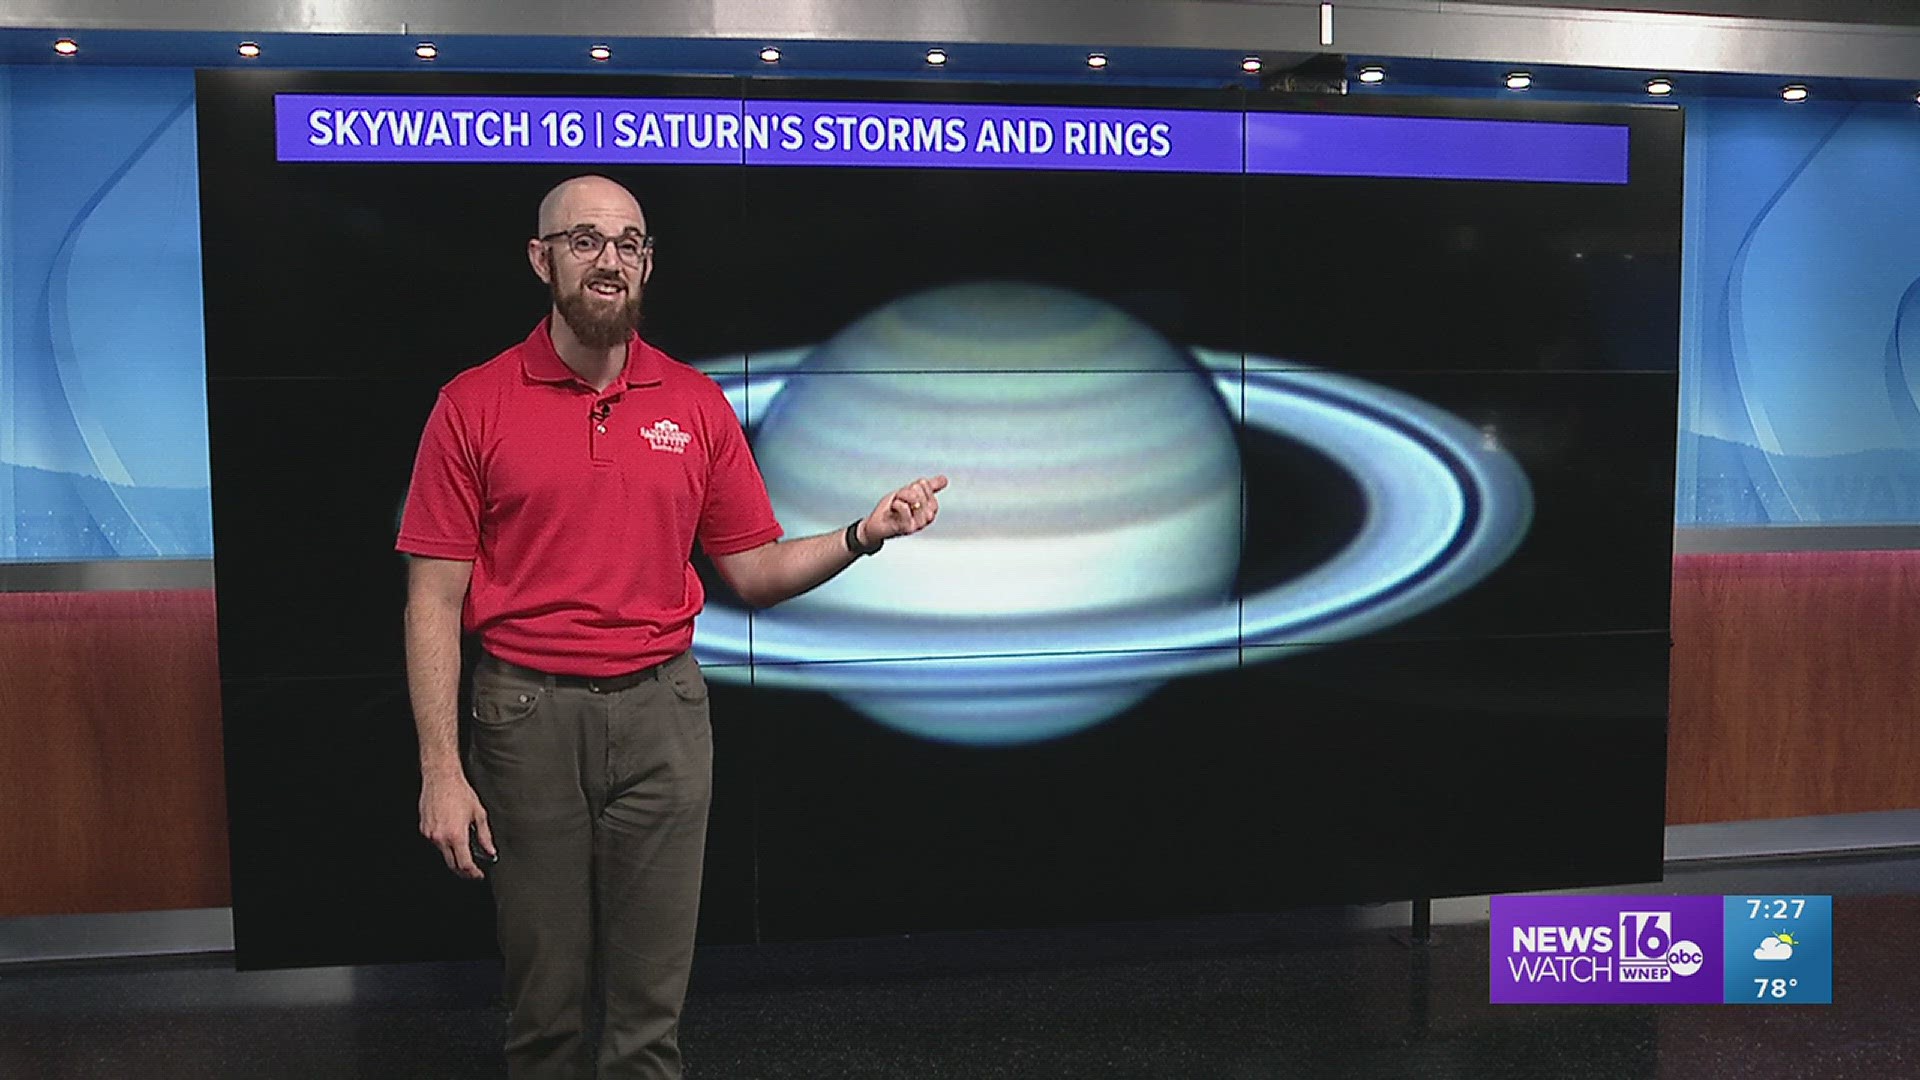 John Hickey takes us on a tour of the cosmos with Skywatch 16.